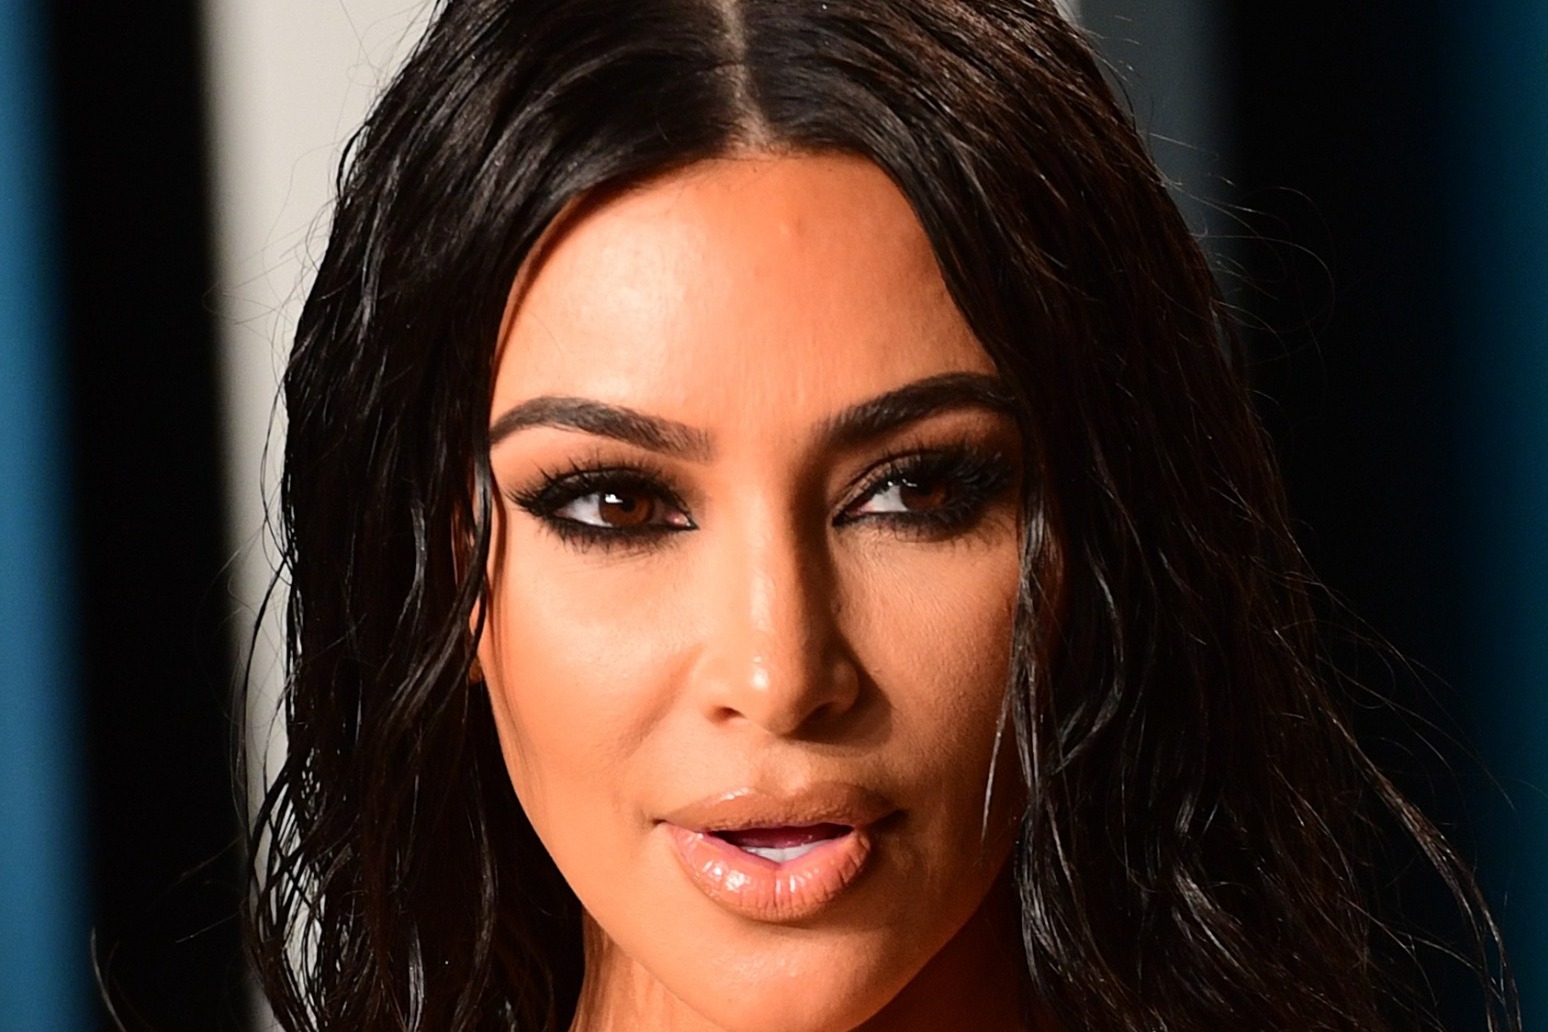 Kim Kardashian West reveals Kate Moss as the new face of her SKIMS brand 